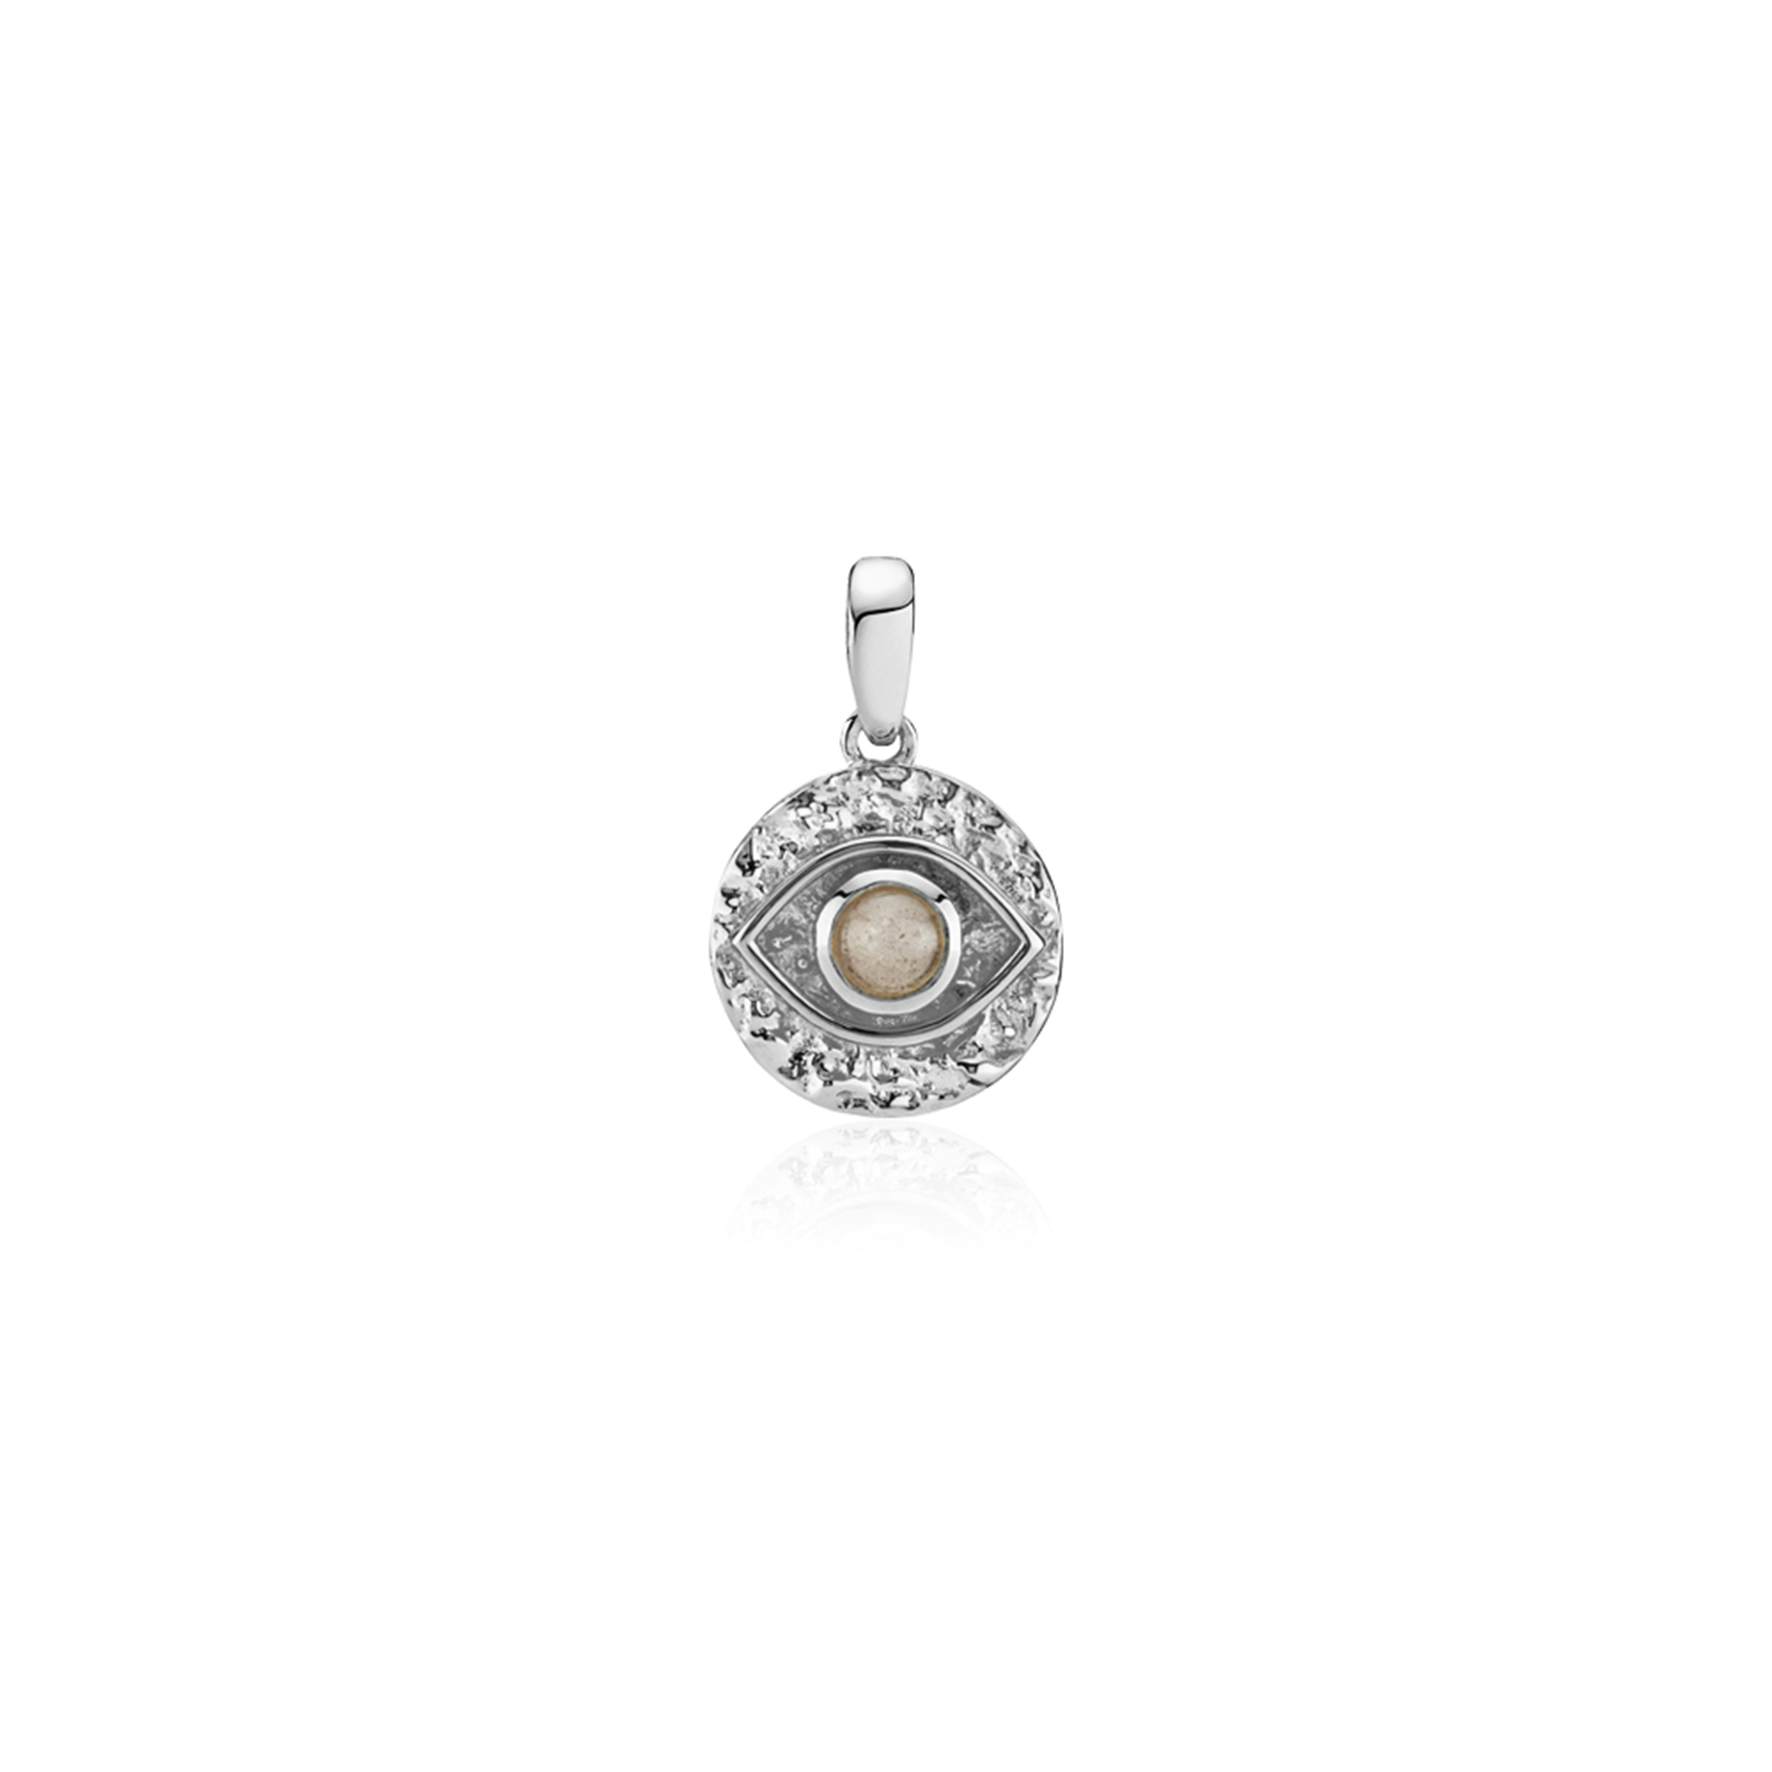 Hanna Martine by Sistie Pendant from Sistie in Silver Sterling 925